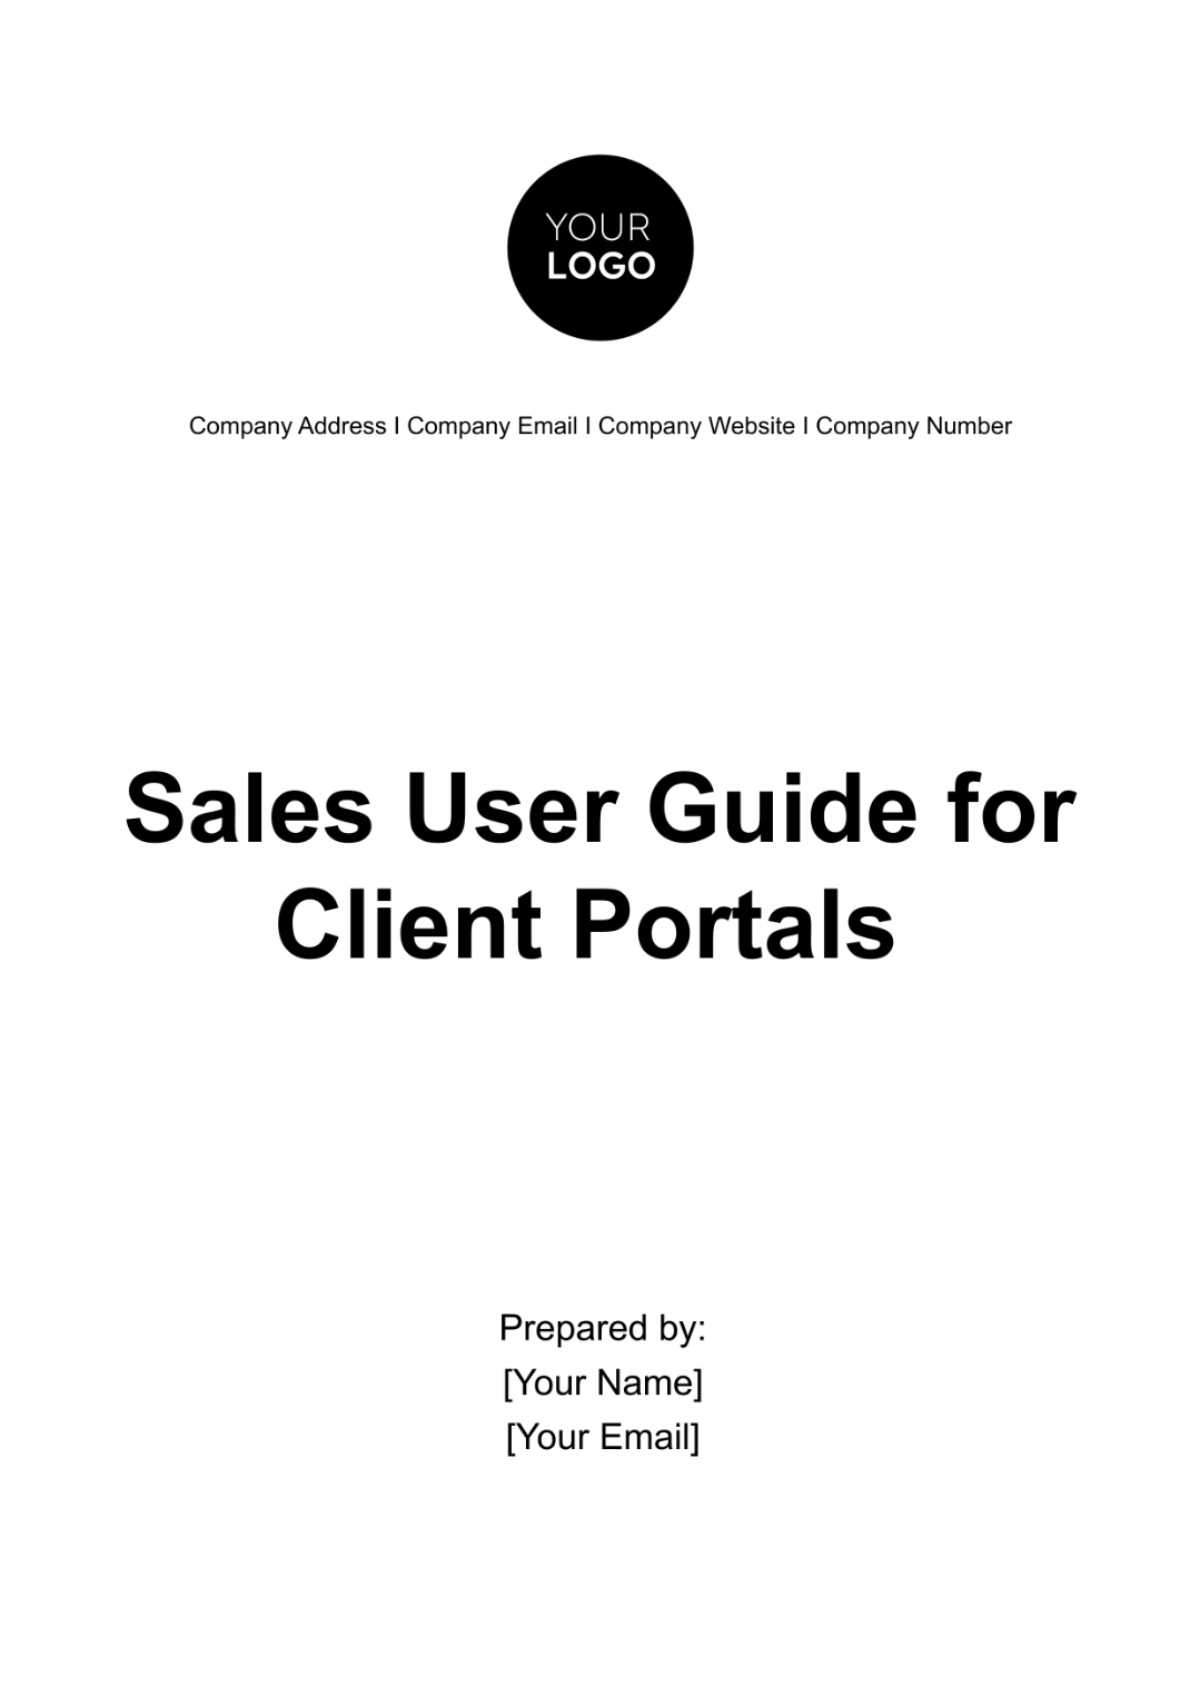 Sales User Guide for Client Portals Template